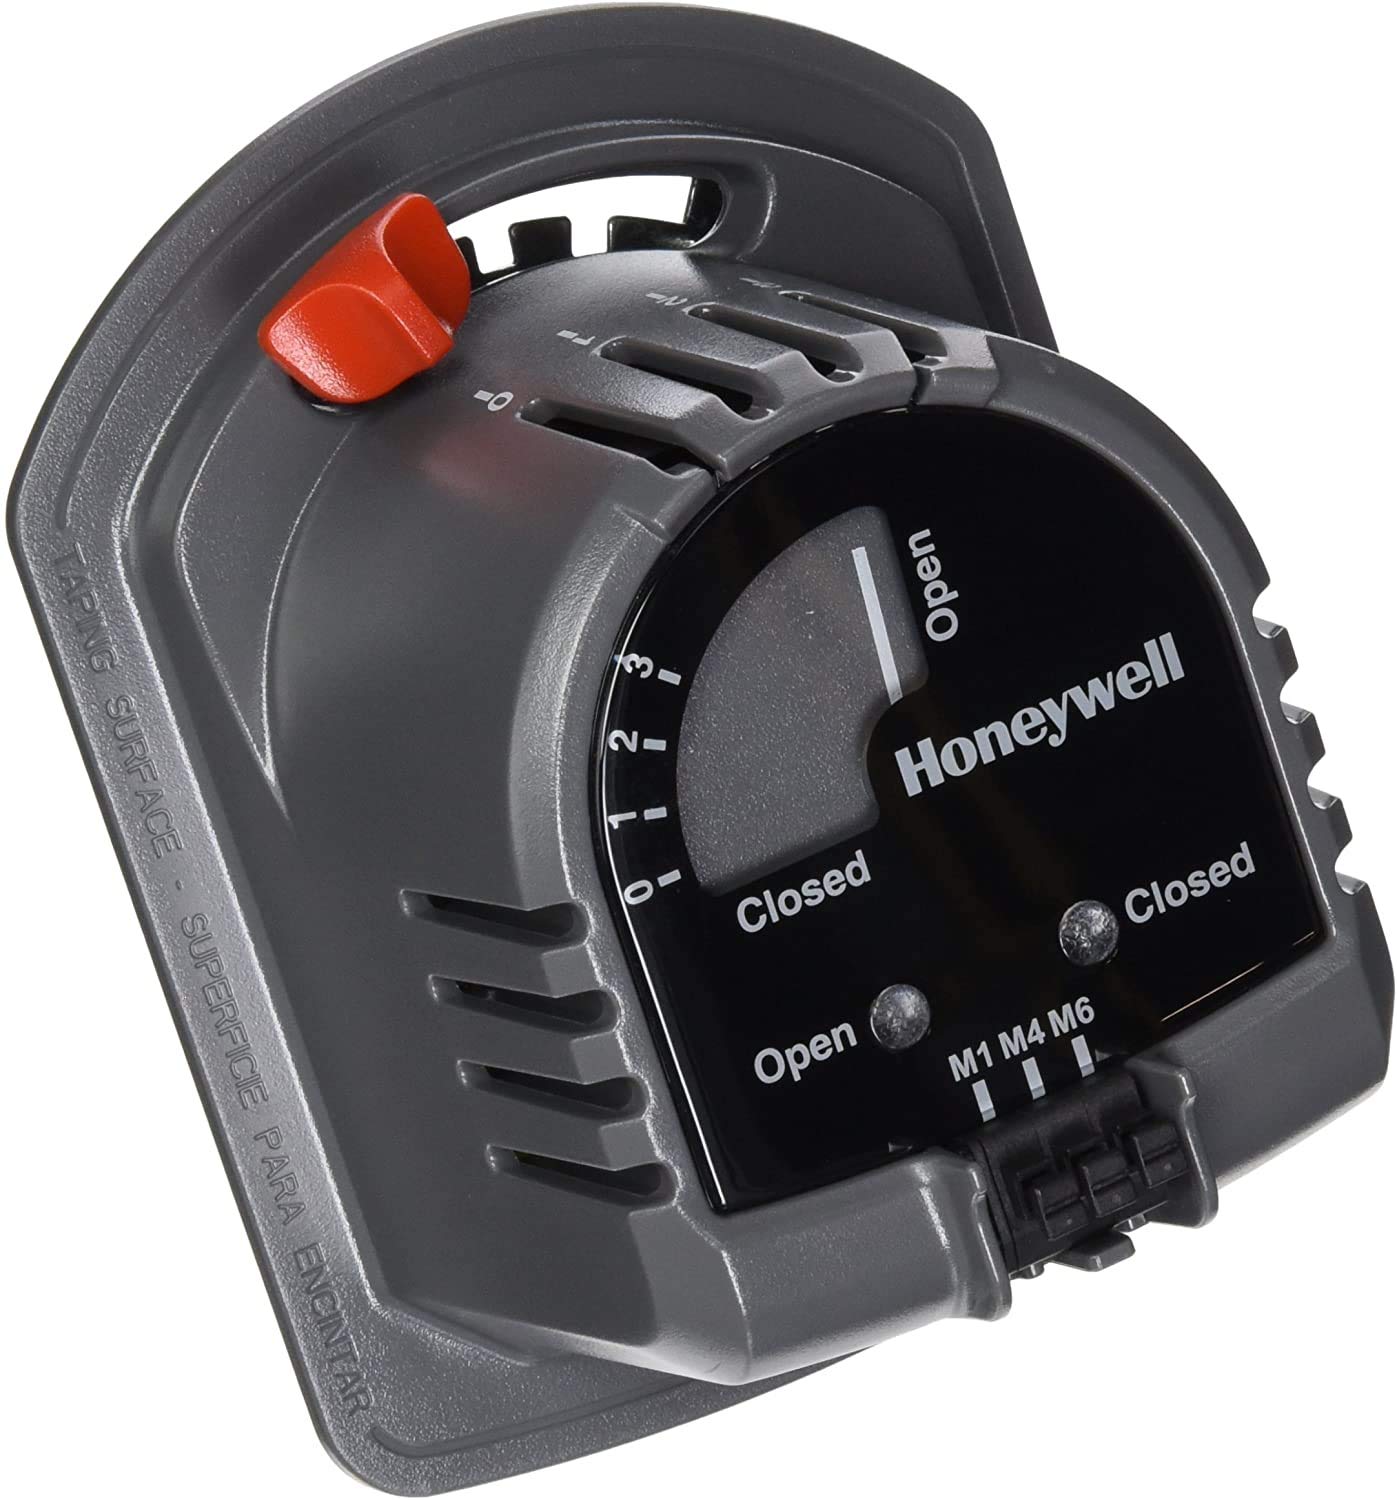 Honeywell Replacement Motor for Ard and Zd Zone Dampers, 24V + LCD Cleaner